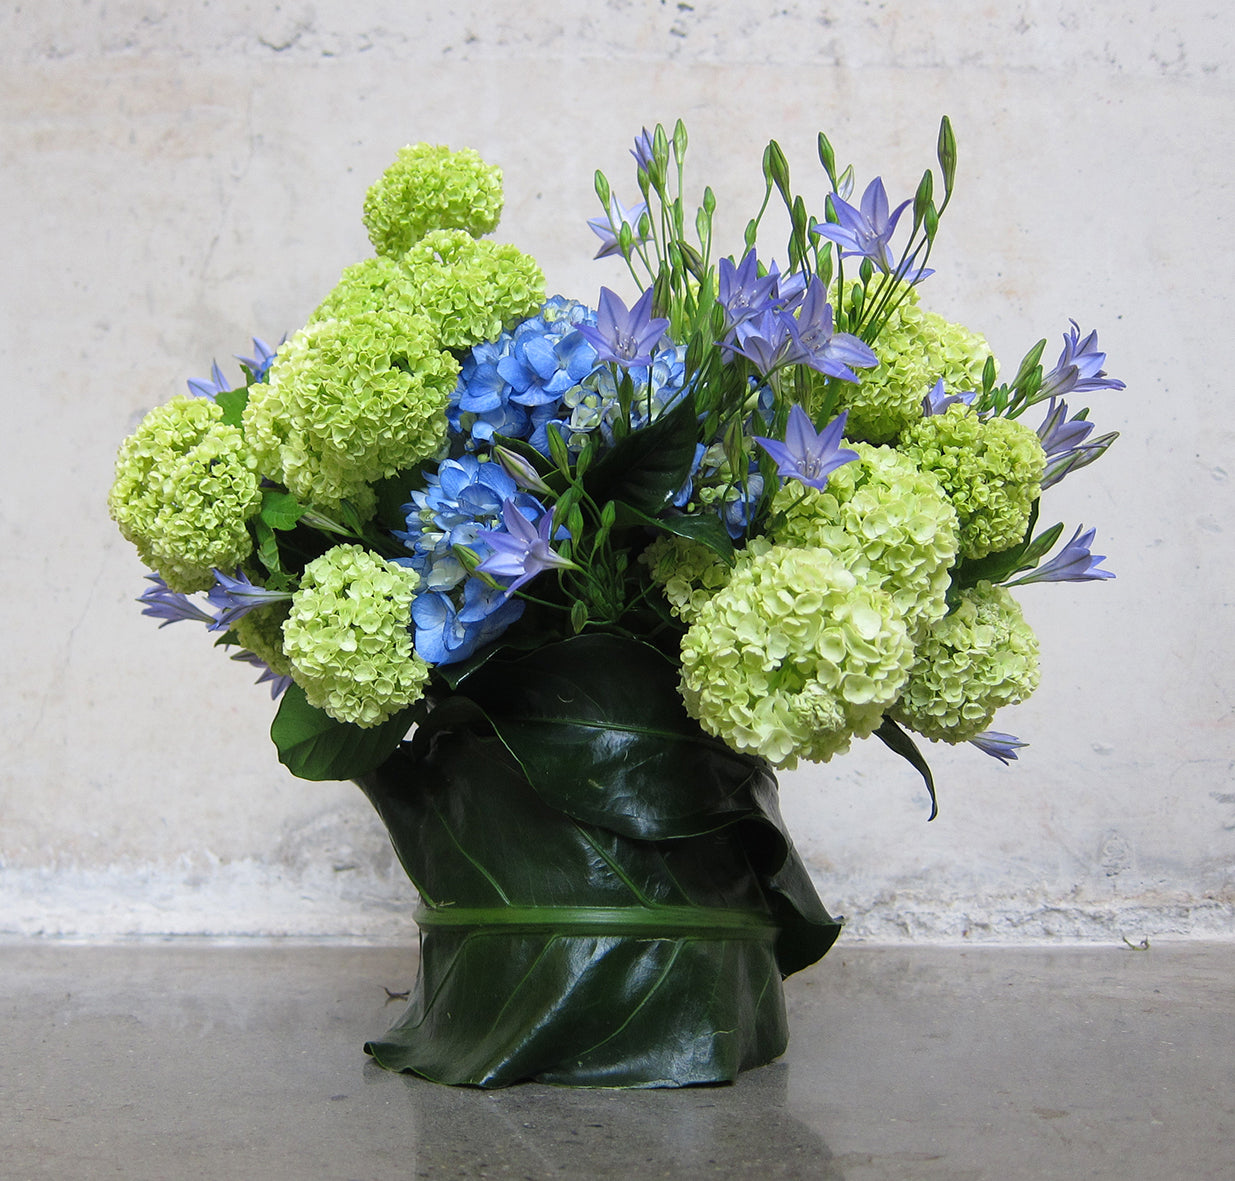 An arrangement of ECCENTRIC blue and green flowers in a vase by TAKAYASATO.COM.